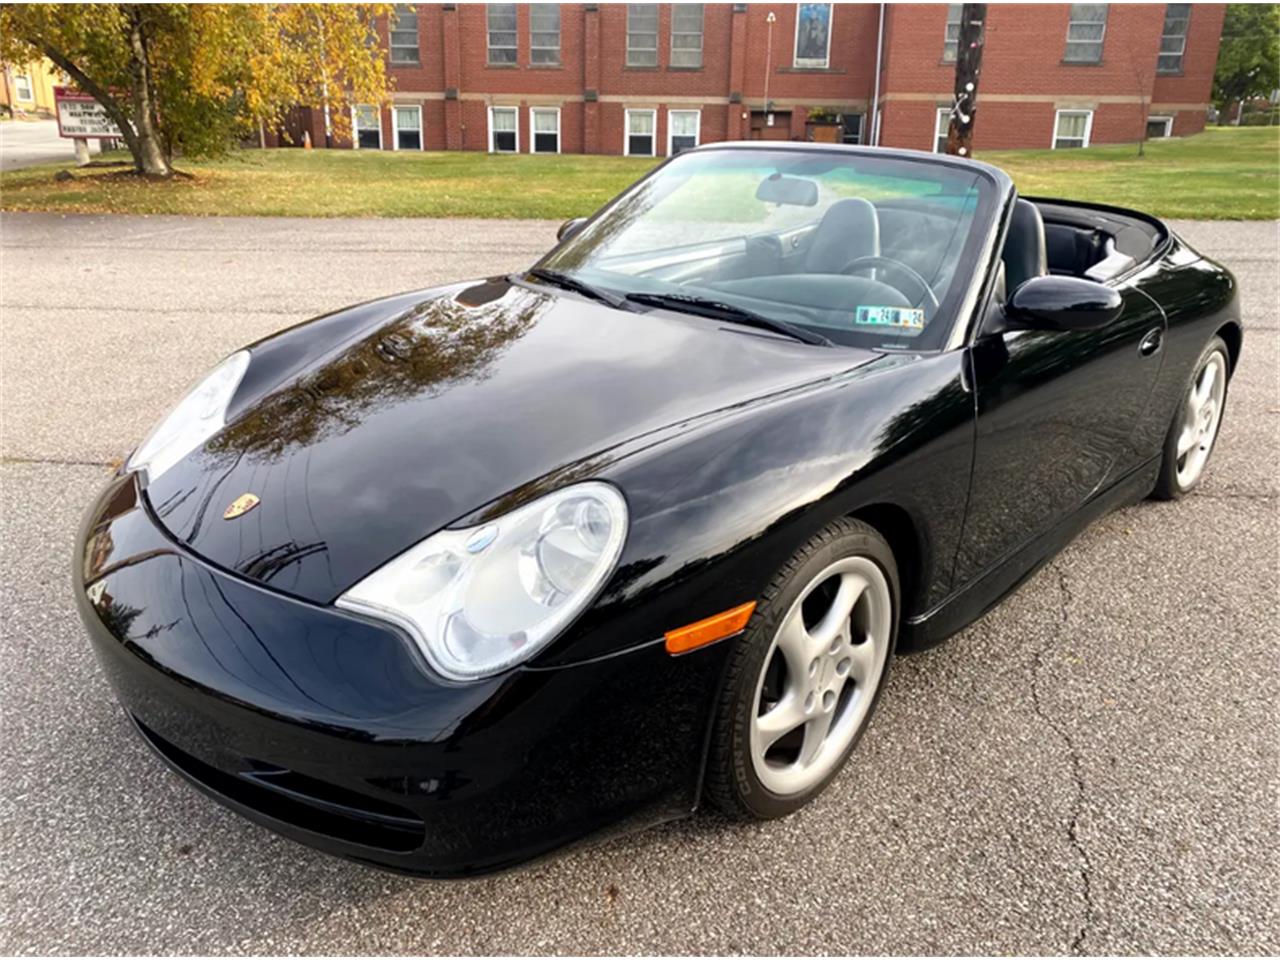 For Sale at Auction: 2002 Porsche 911 Carrera in Punta Gorda, Florida for sale in Punta Gorda, FL